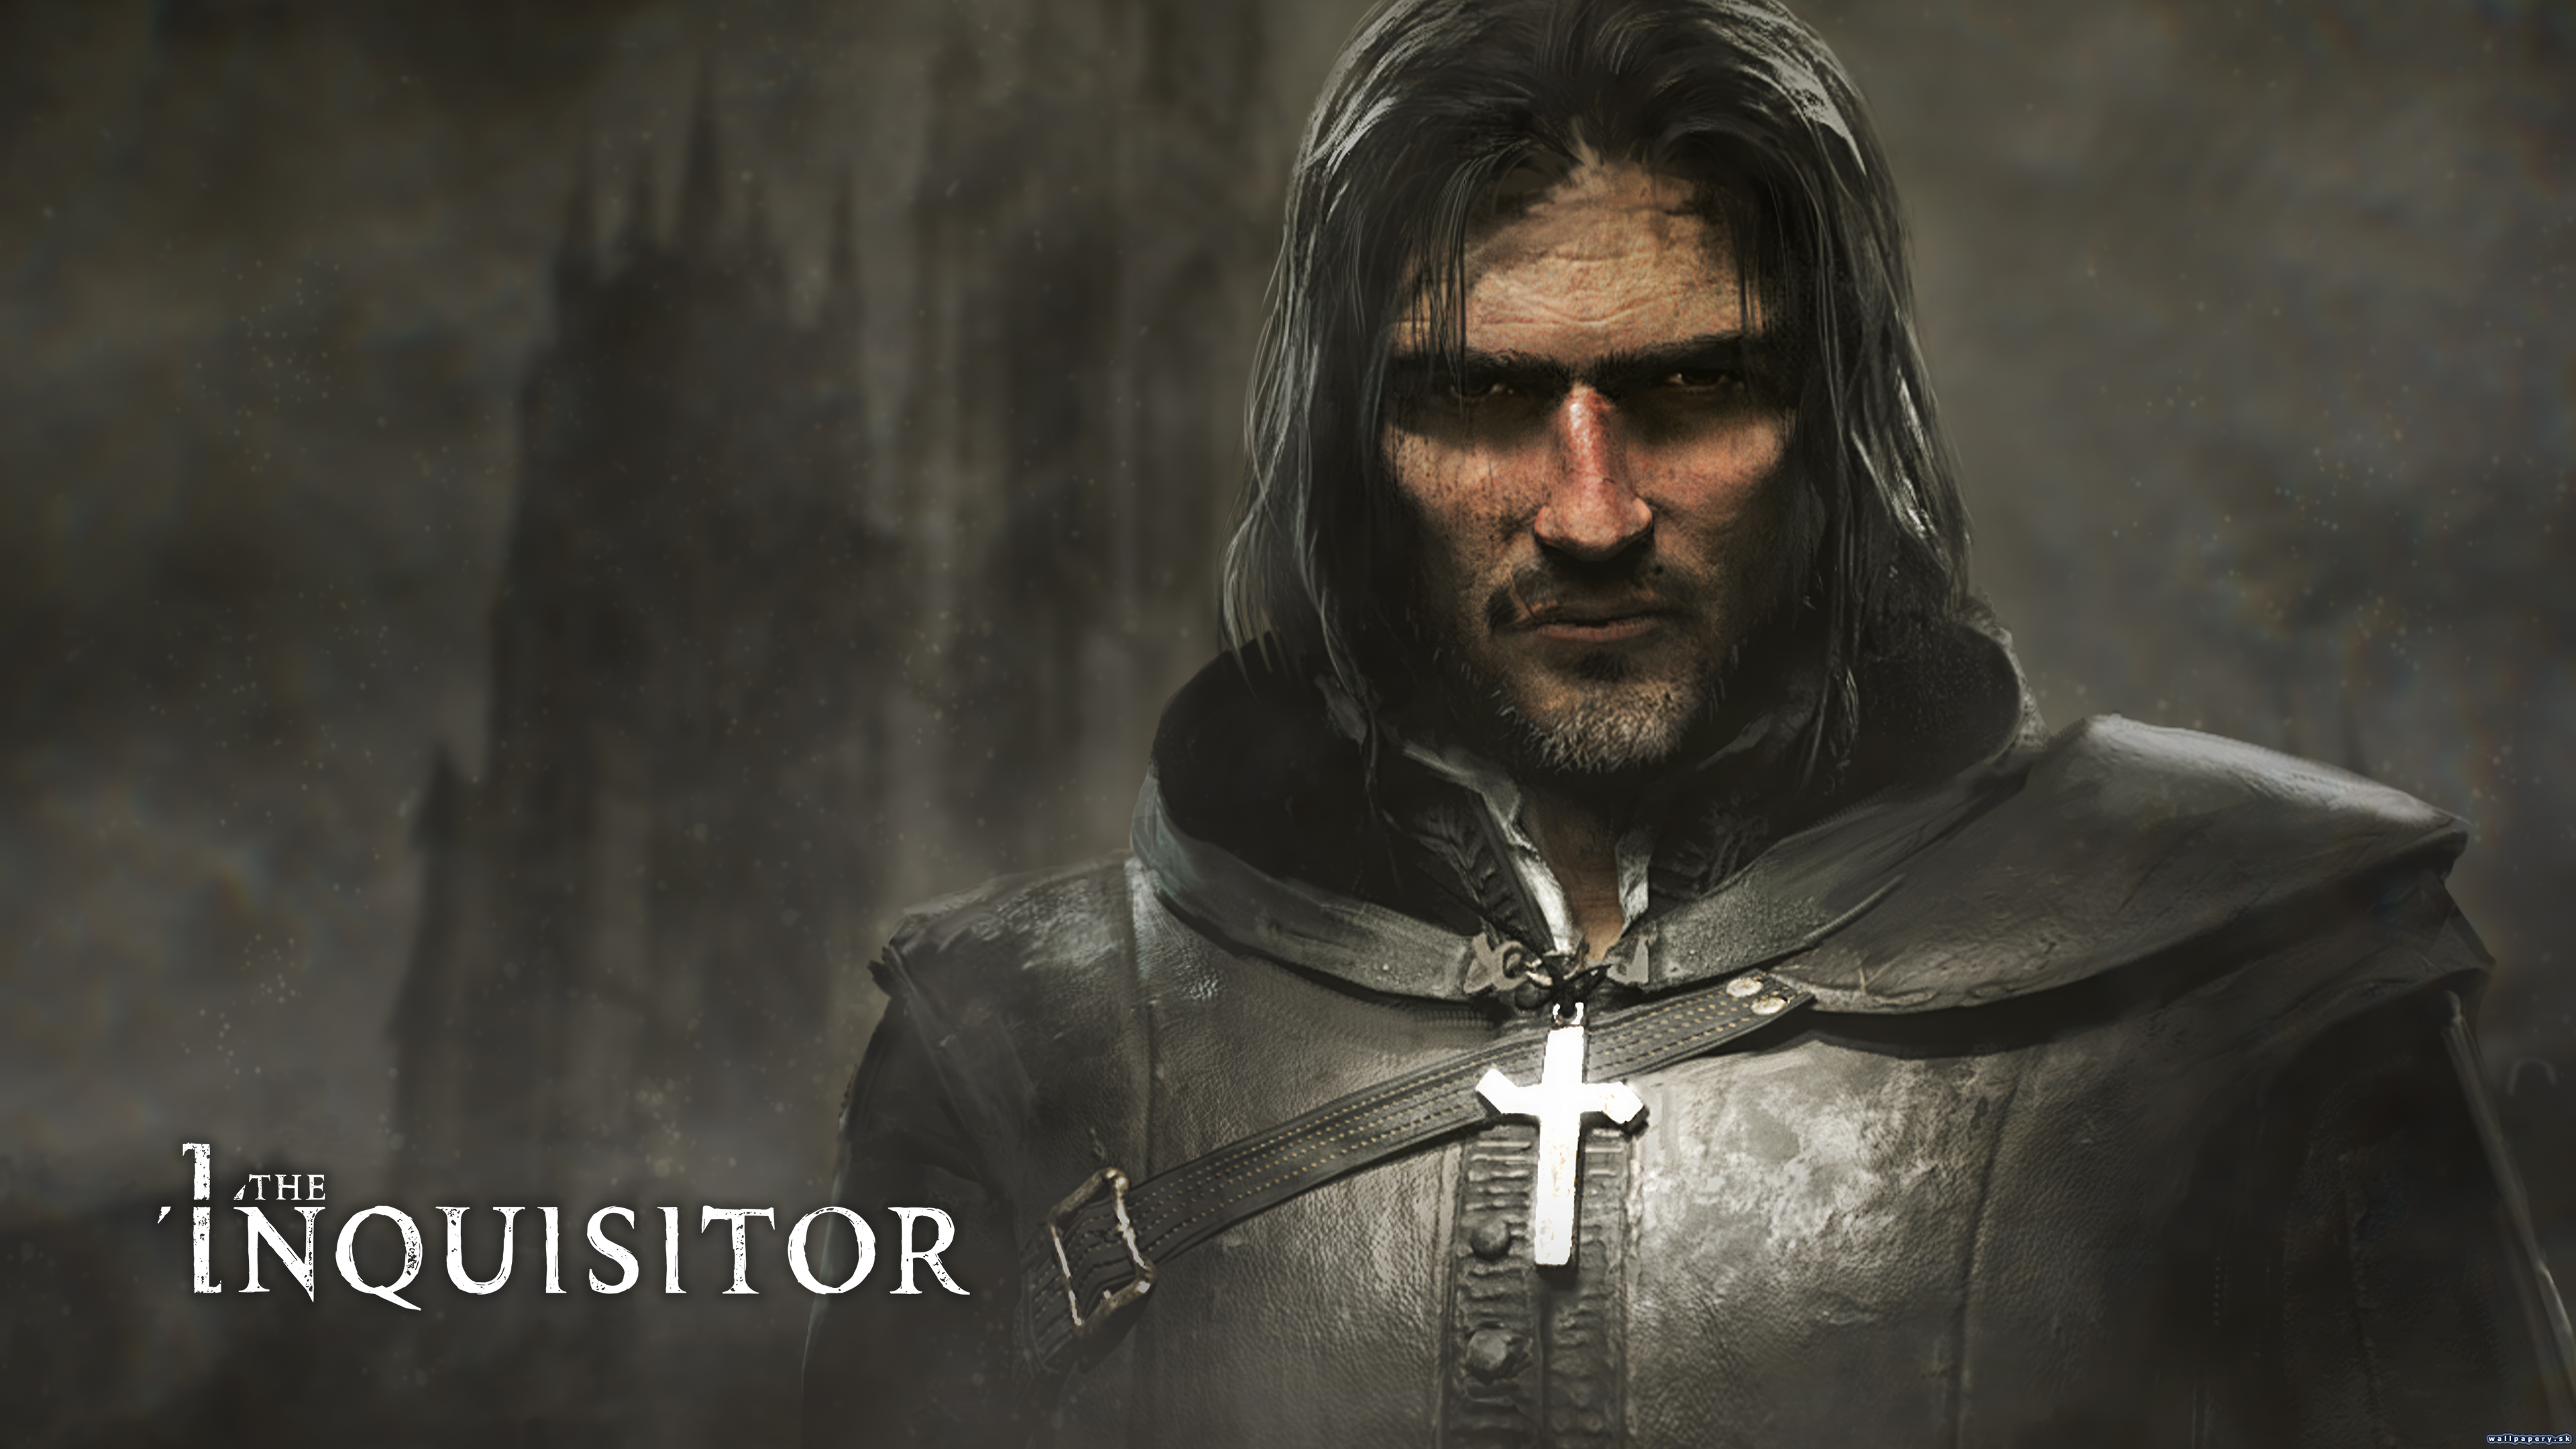 The Inquisitor - wallpaper 1